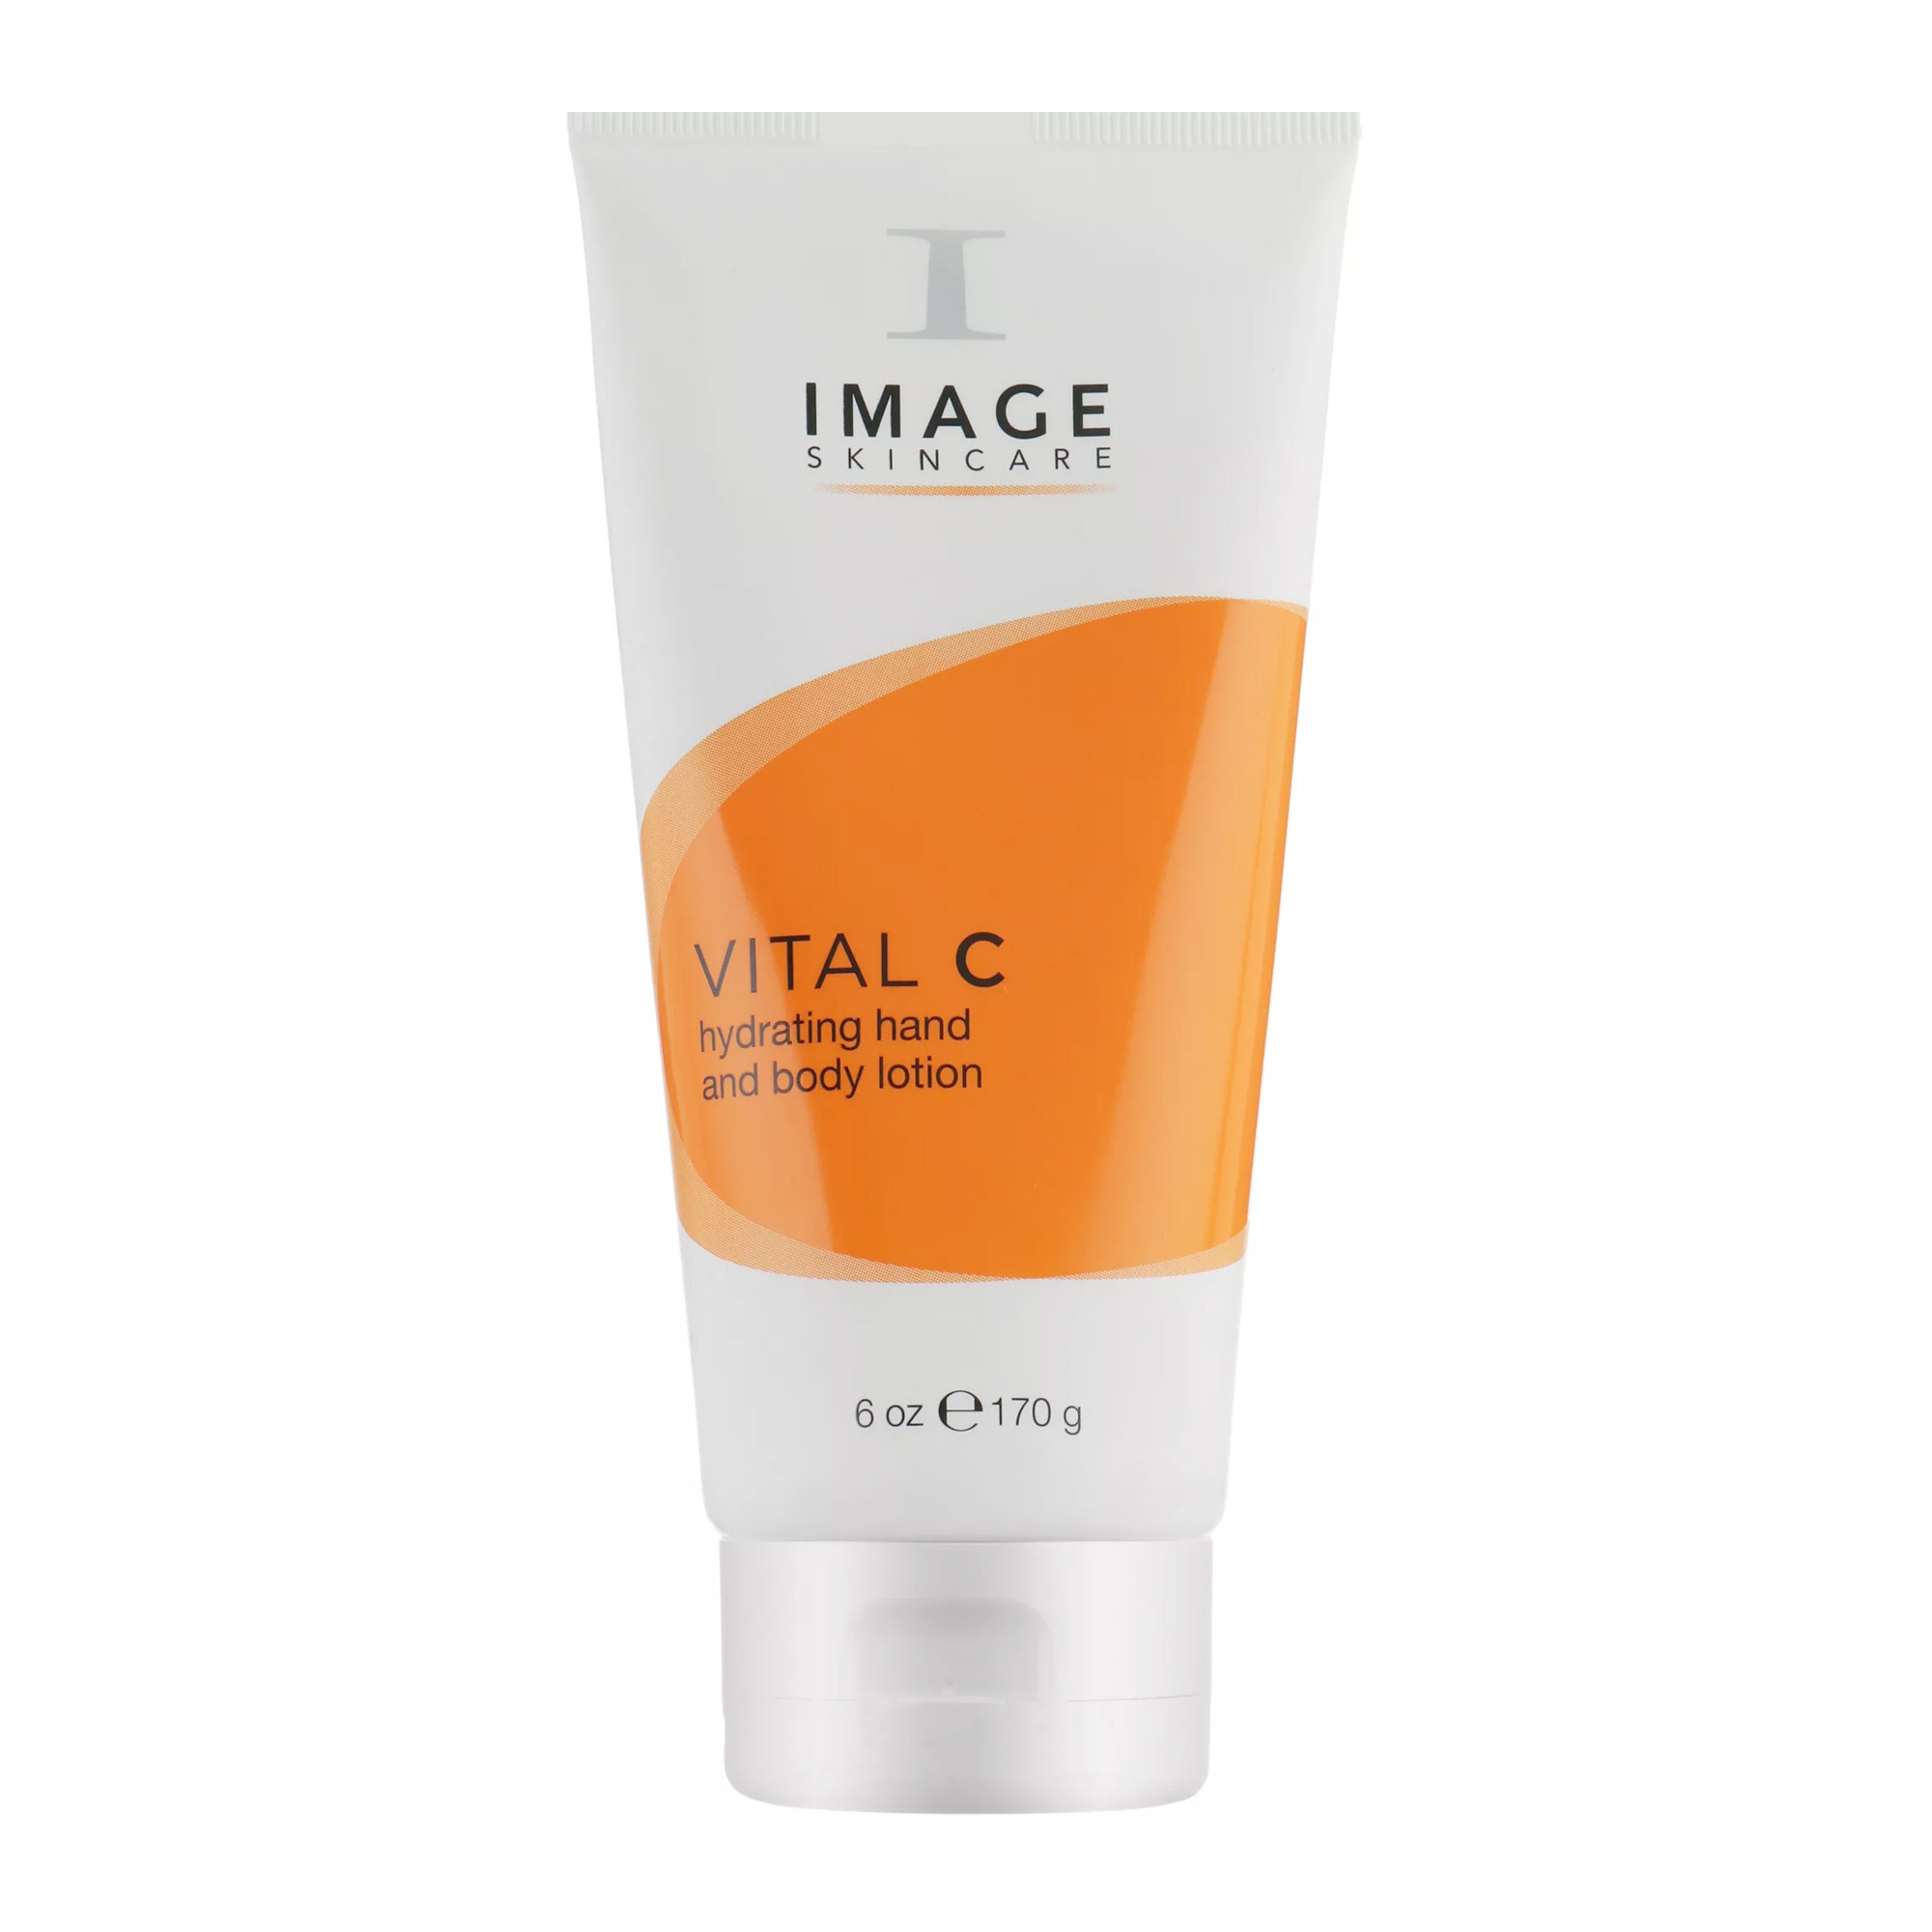 image skincare vital c hydrating hand and body lotion